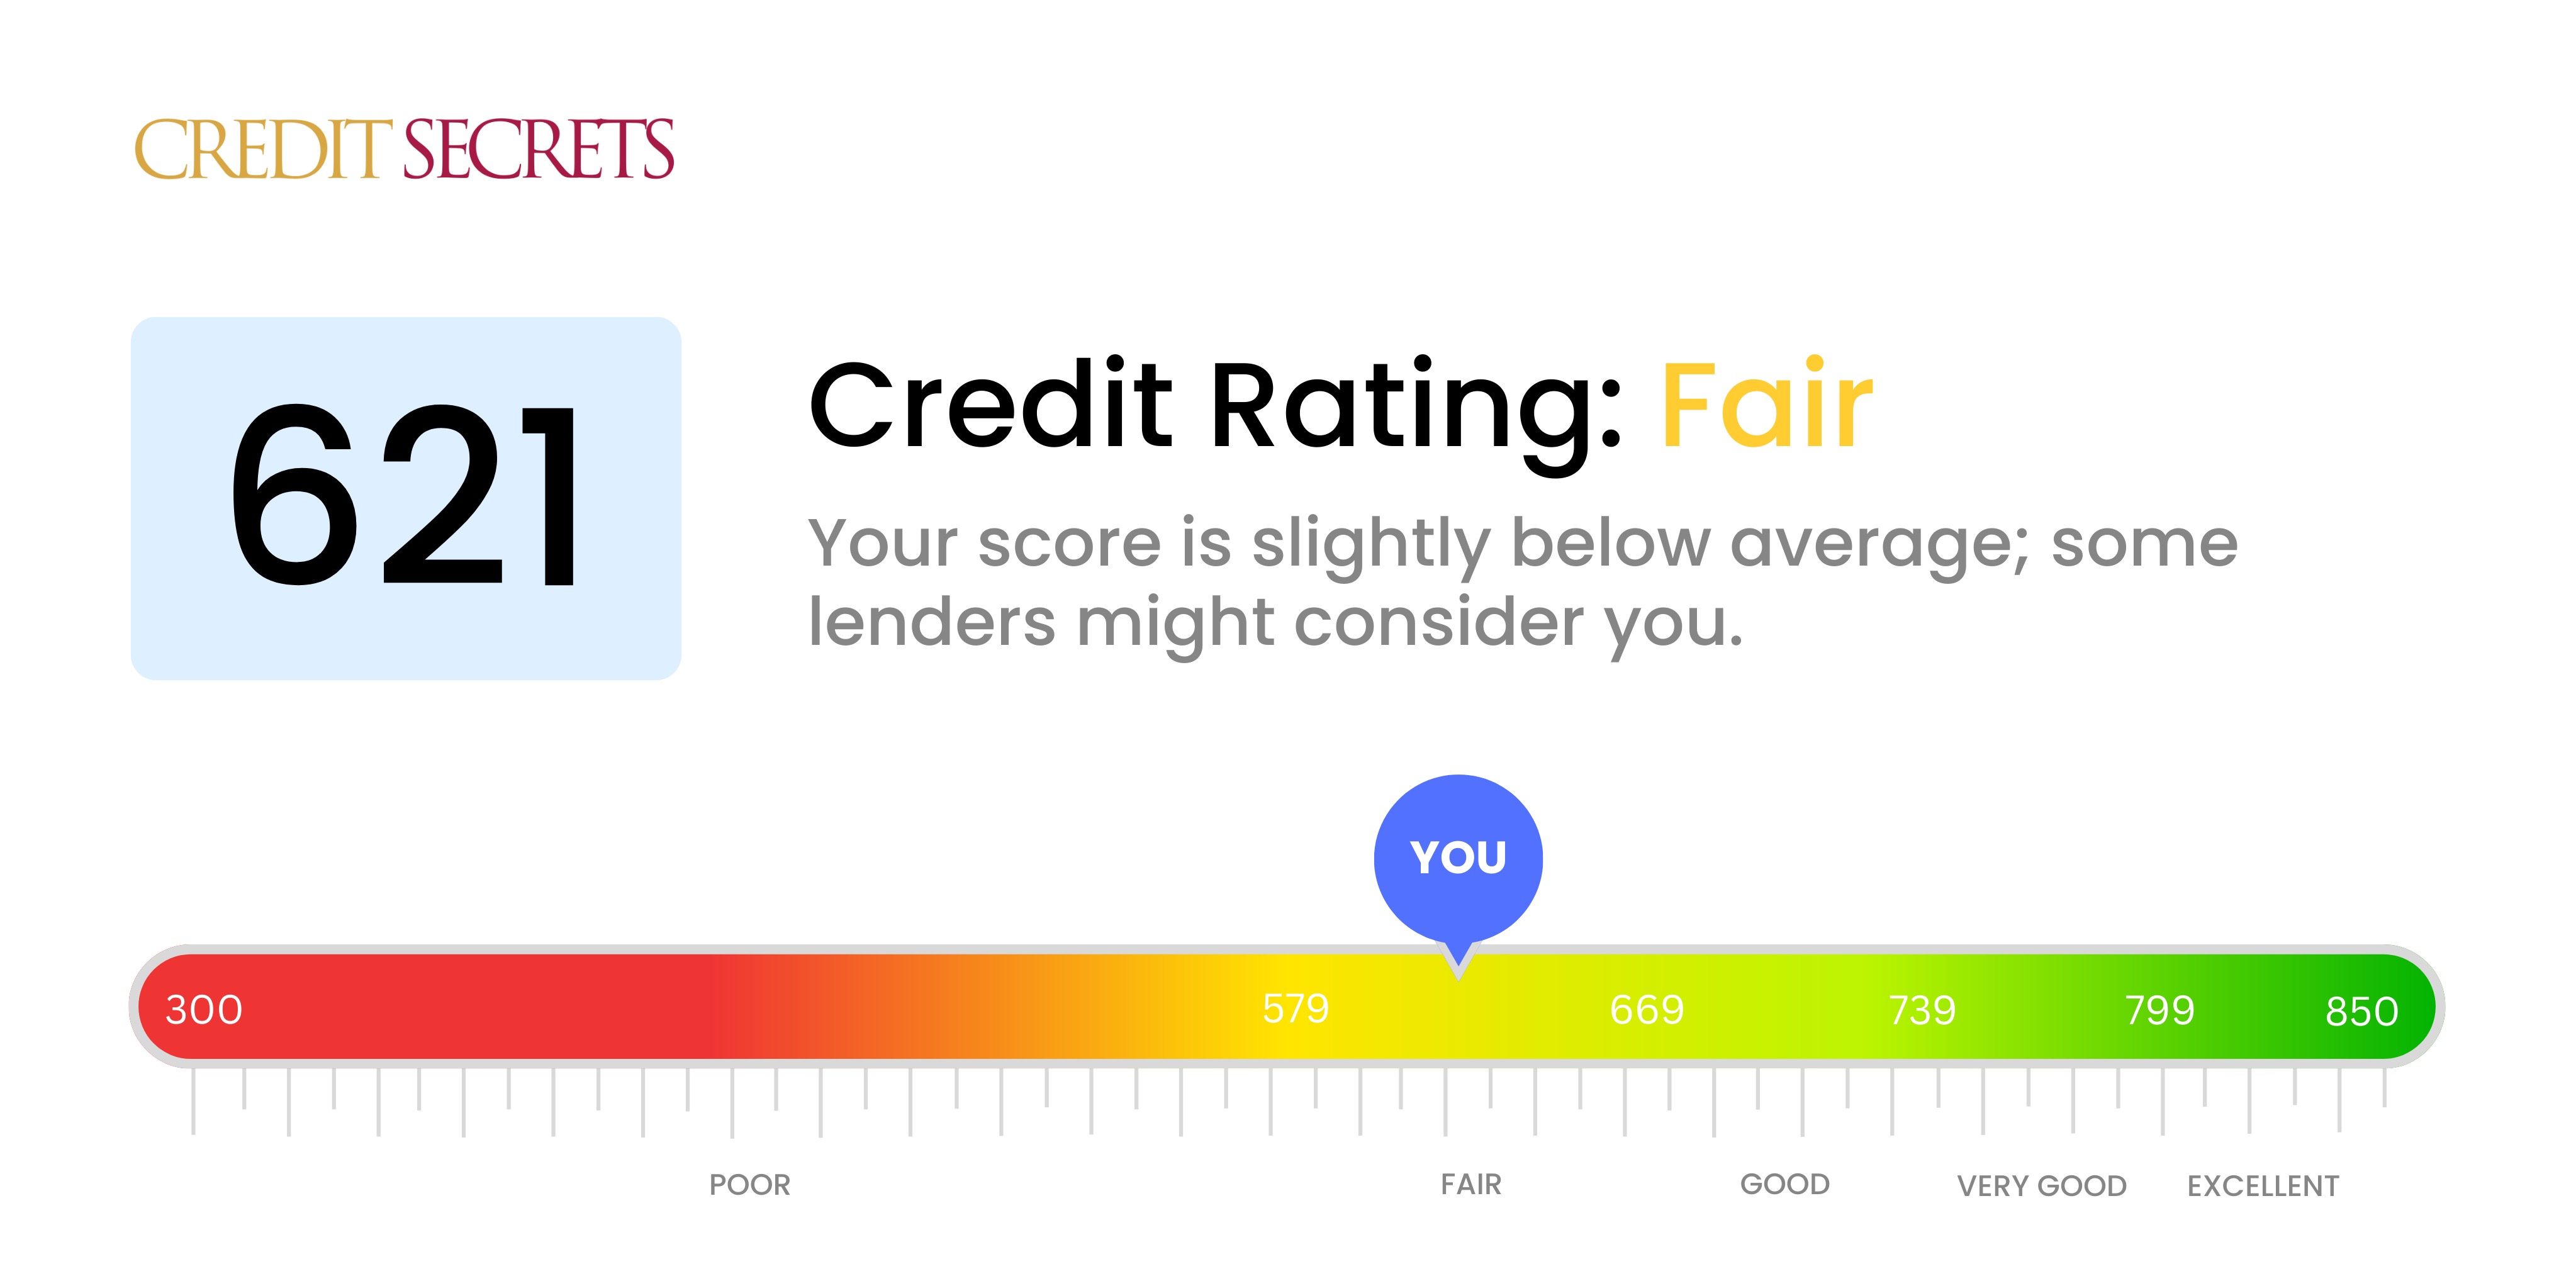 Is 621 a good credit score?